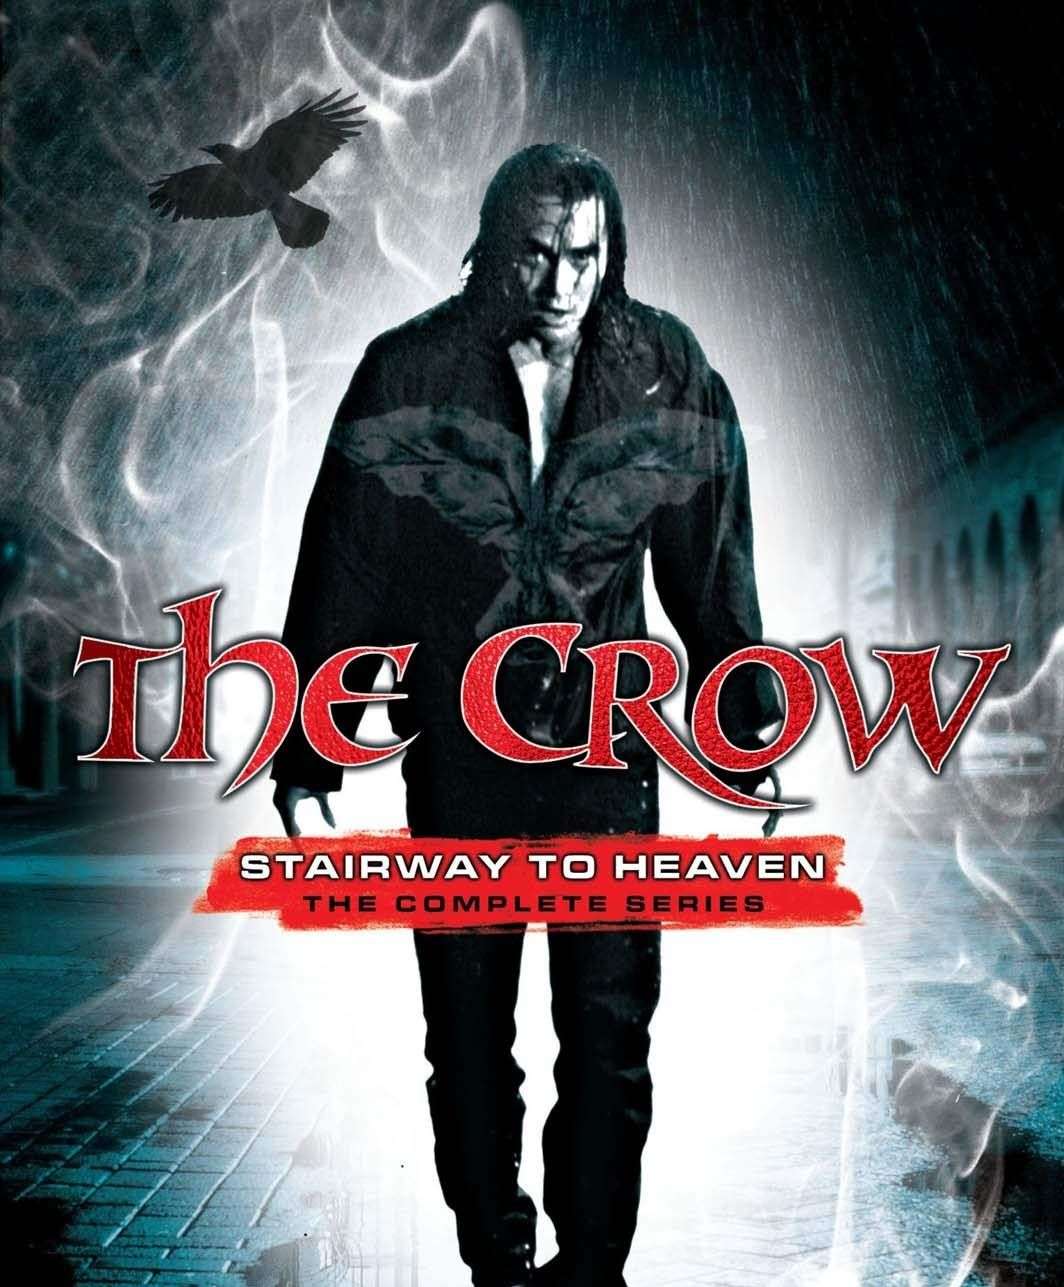 THE CROW STAIRWAY TO HEAVEN -  1998